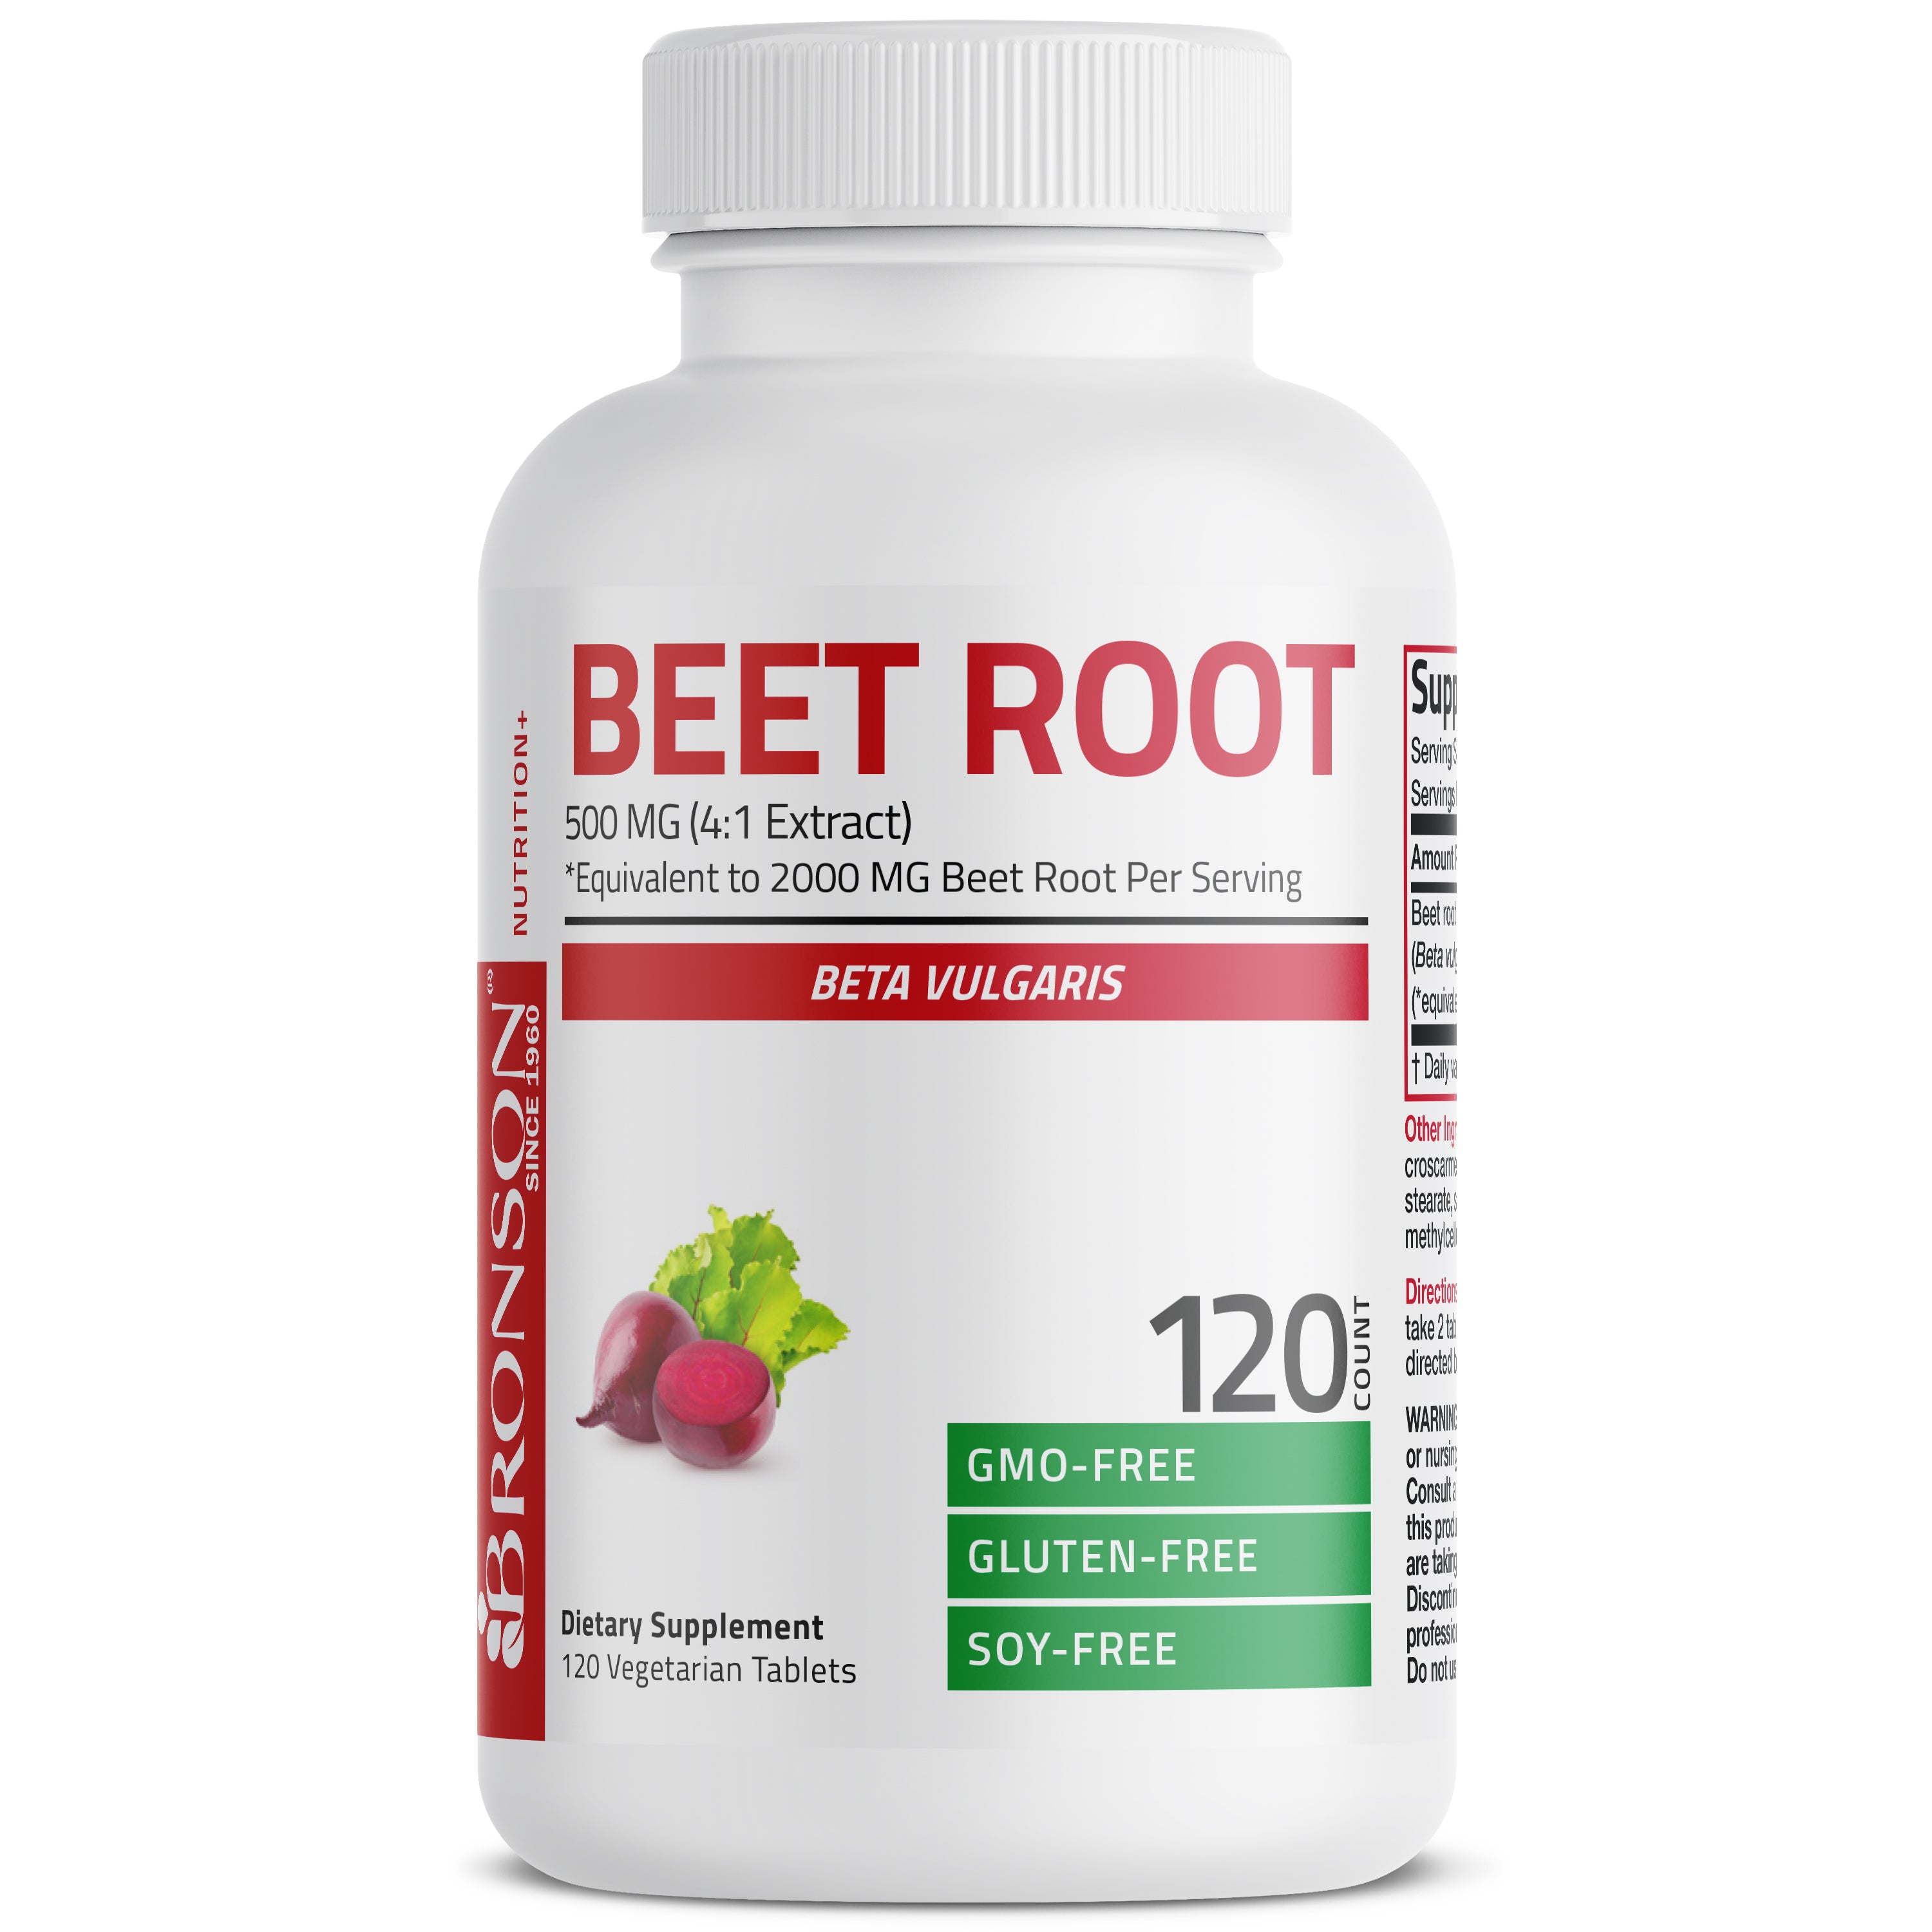 Beet Root Extra Strength - 2,000 mg view 17 of 6